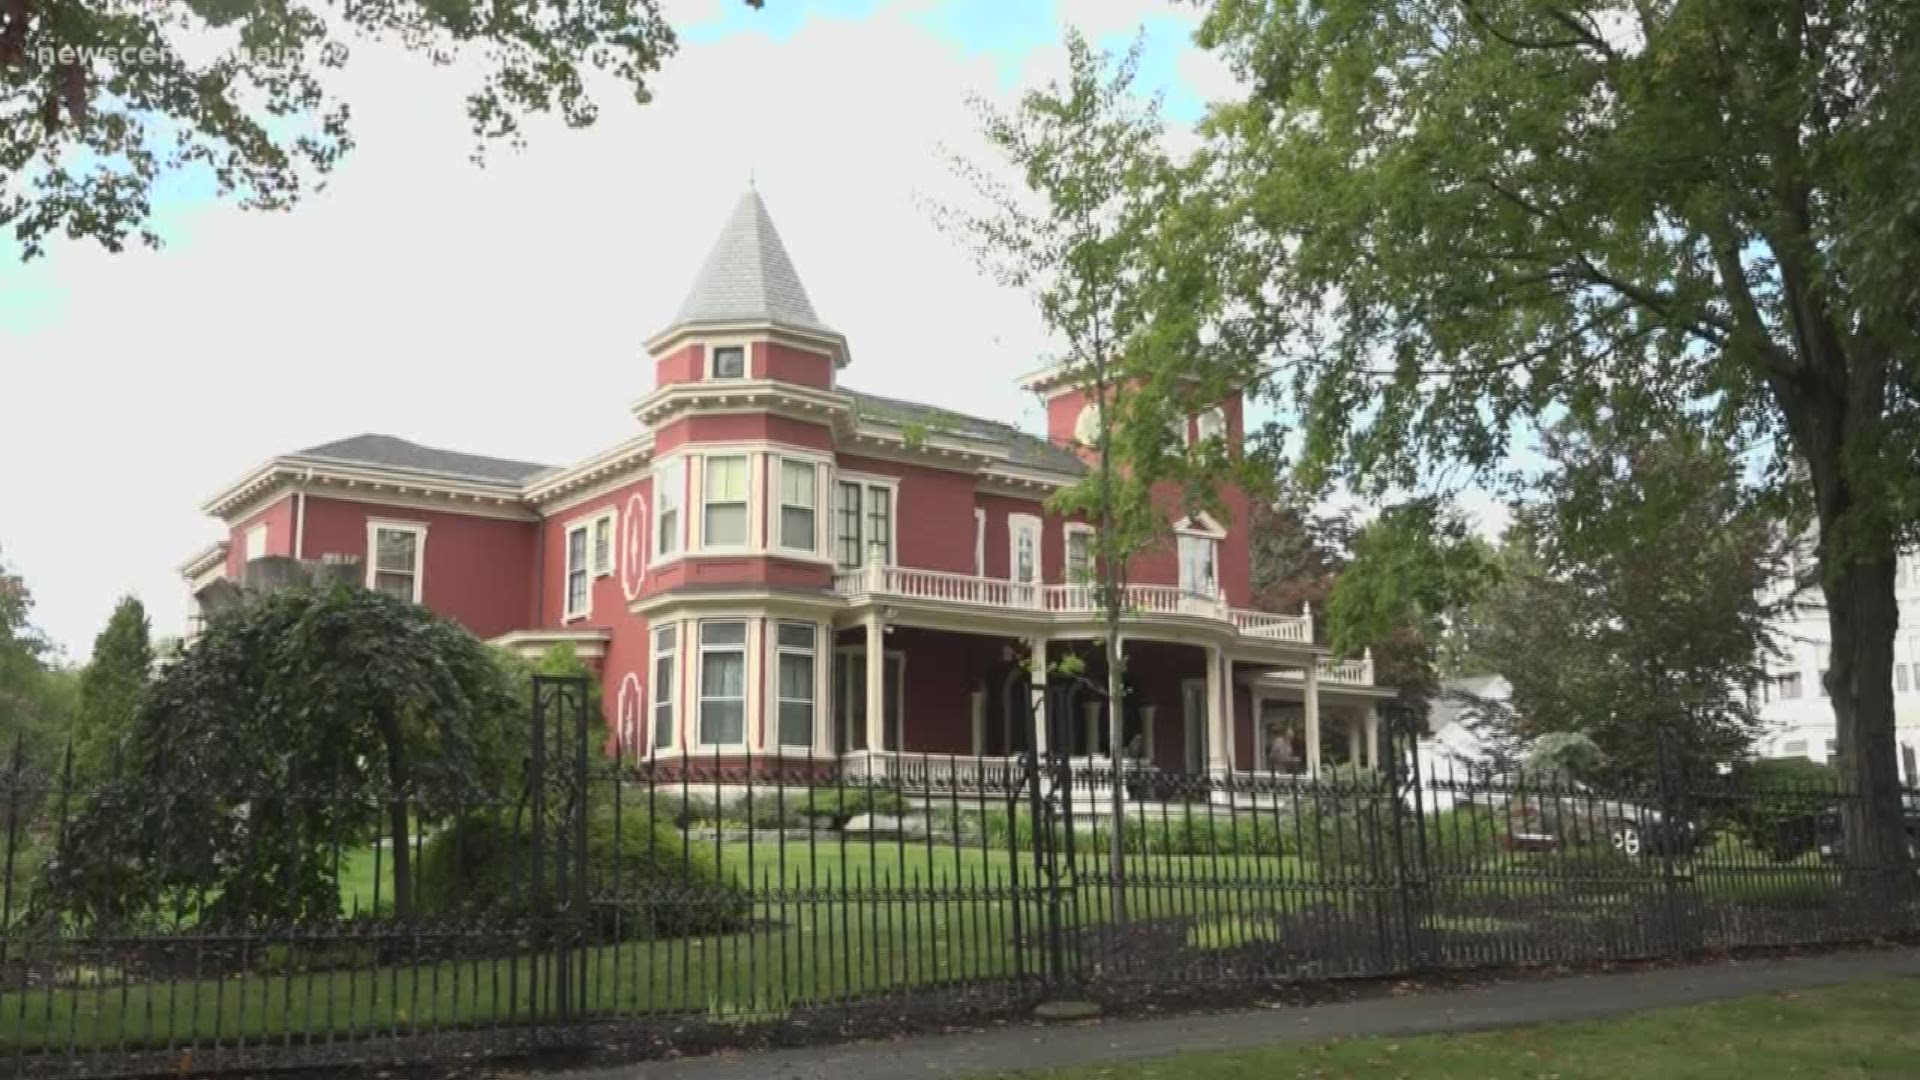 Maine author Stephen King is opening up his famous home to other authors and a place to store his personal archives.